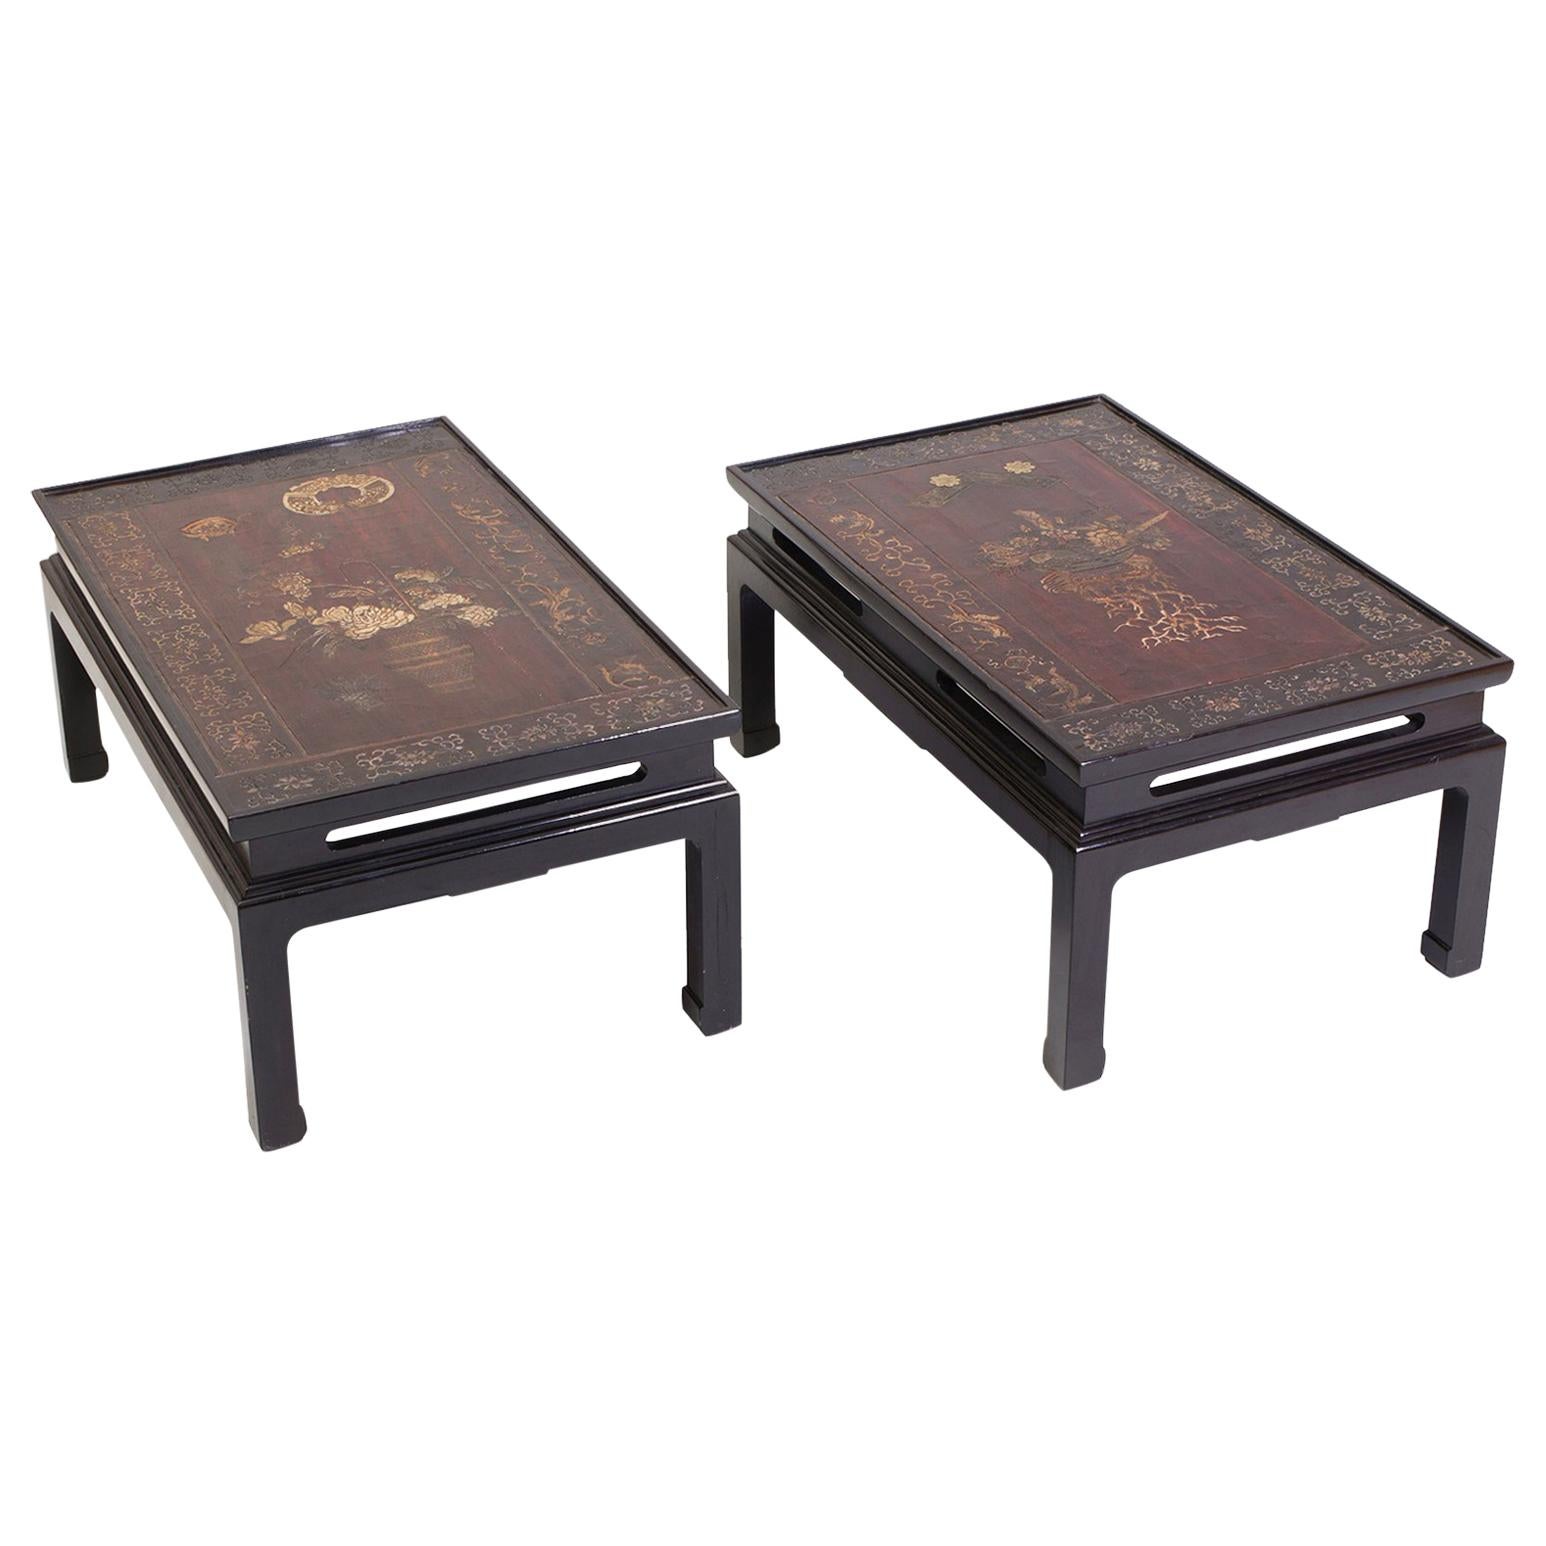 Early 20th Century Chinese Lacquered Panel Tables, a Pair